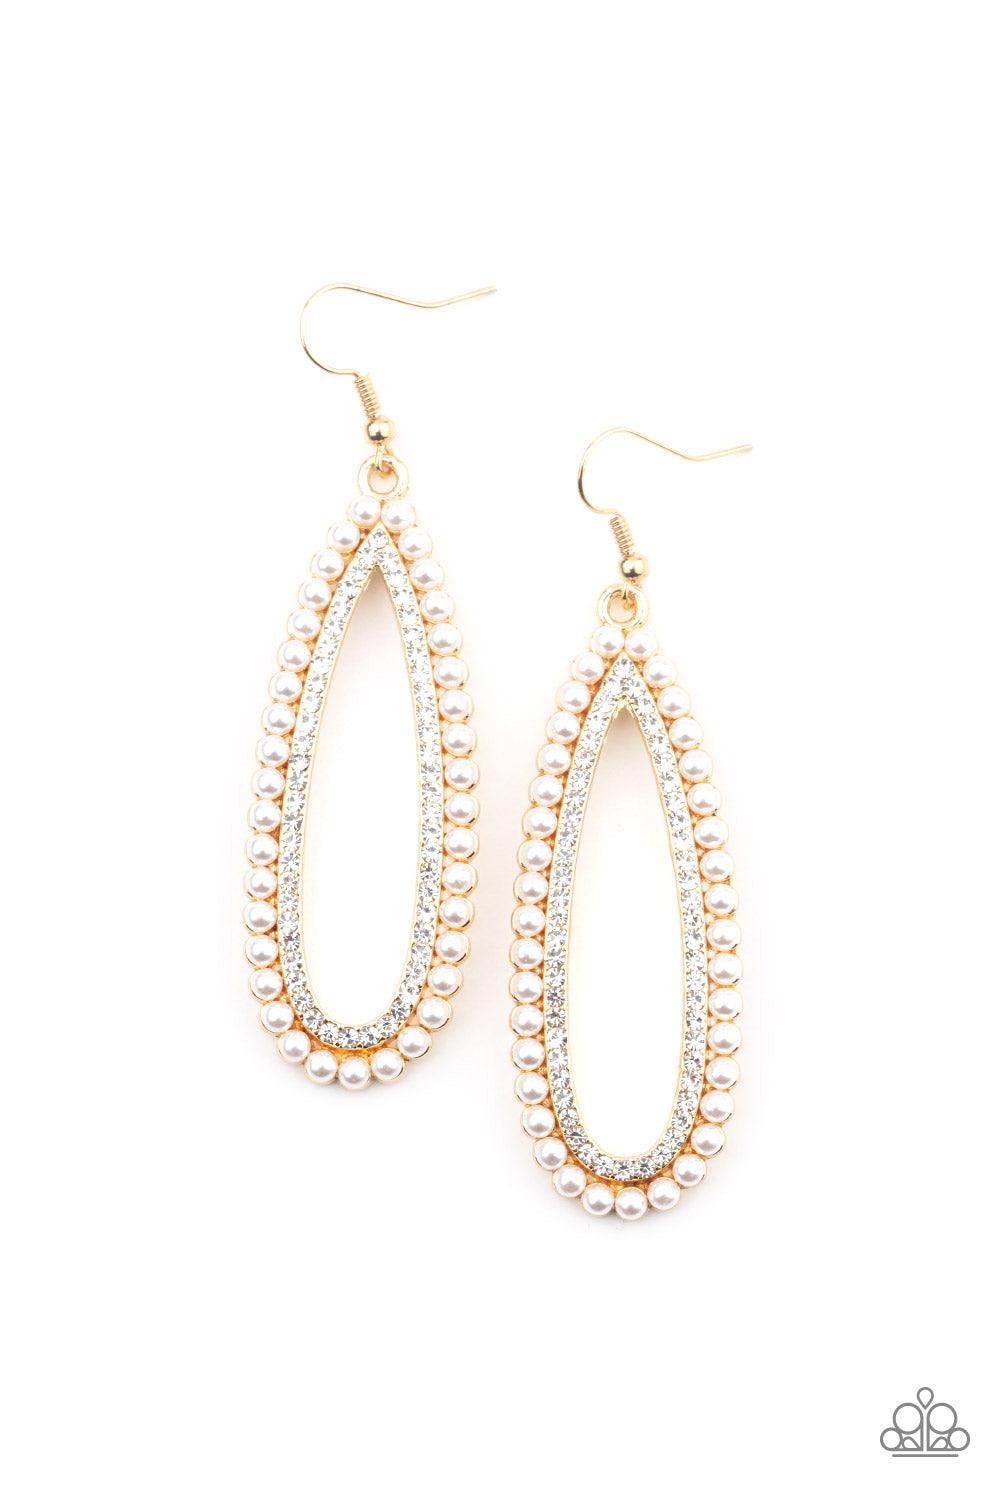 Paparazzi Accessories Glamorously Glowing - Gold A collection of dainty white pearls surrounds a glittery row of glassy white rhinestones, stacking into a vintage inspired teardrop frame. Earring attaches to a standard fishhook fitting. Sold as one pair o